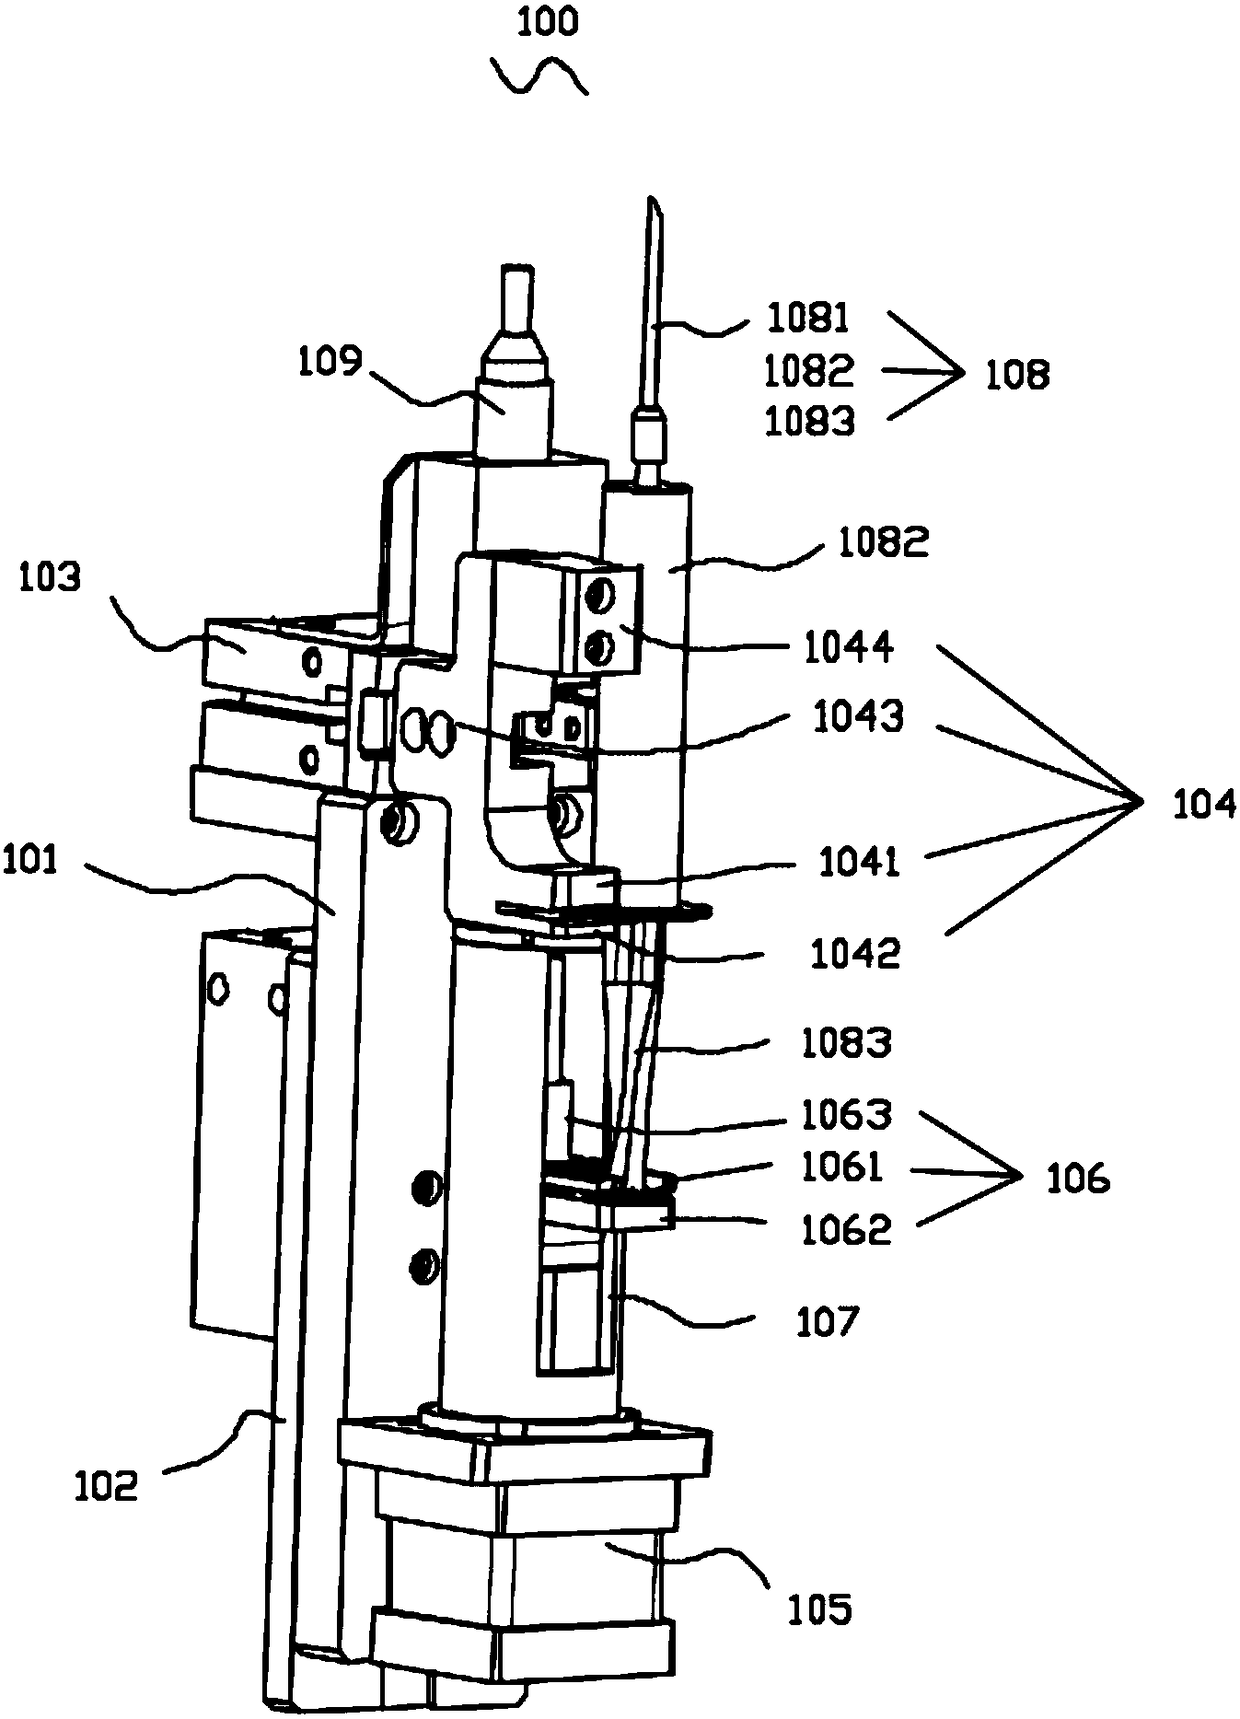 Module for controlling syringe